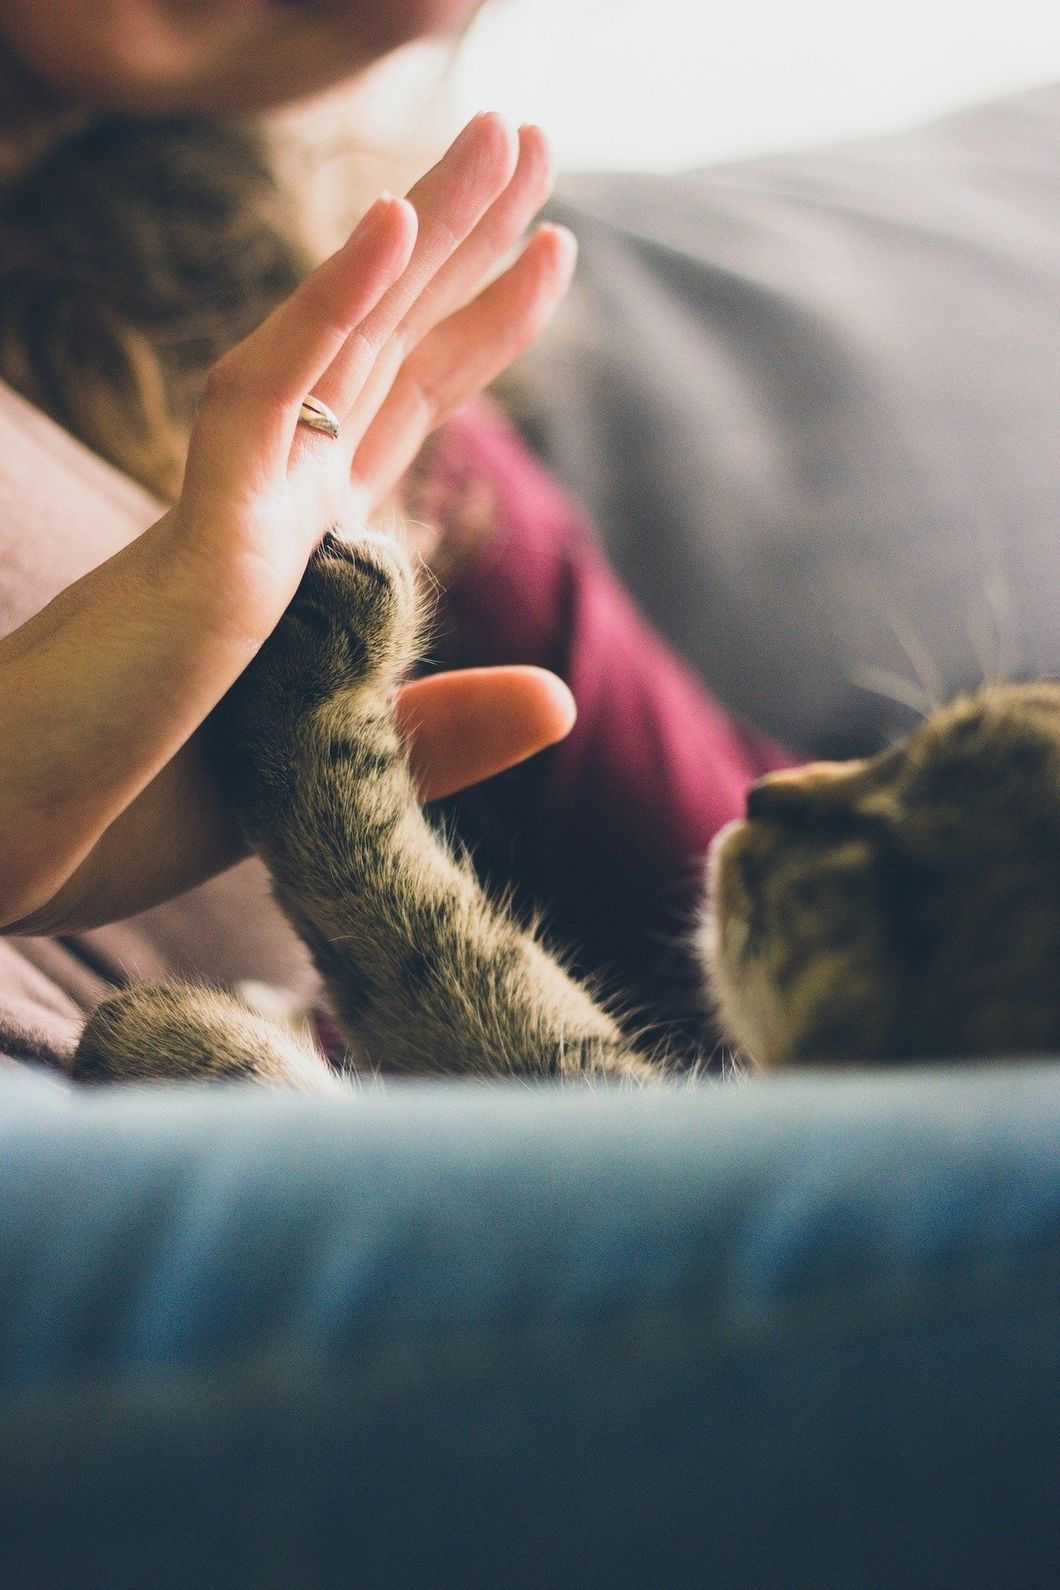 14 Signs You're A Crazy Cat Person